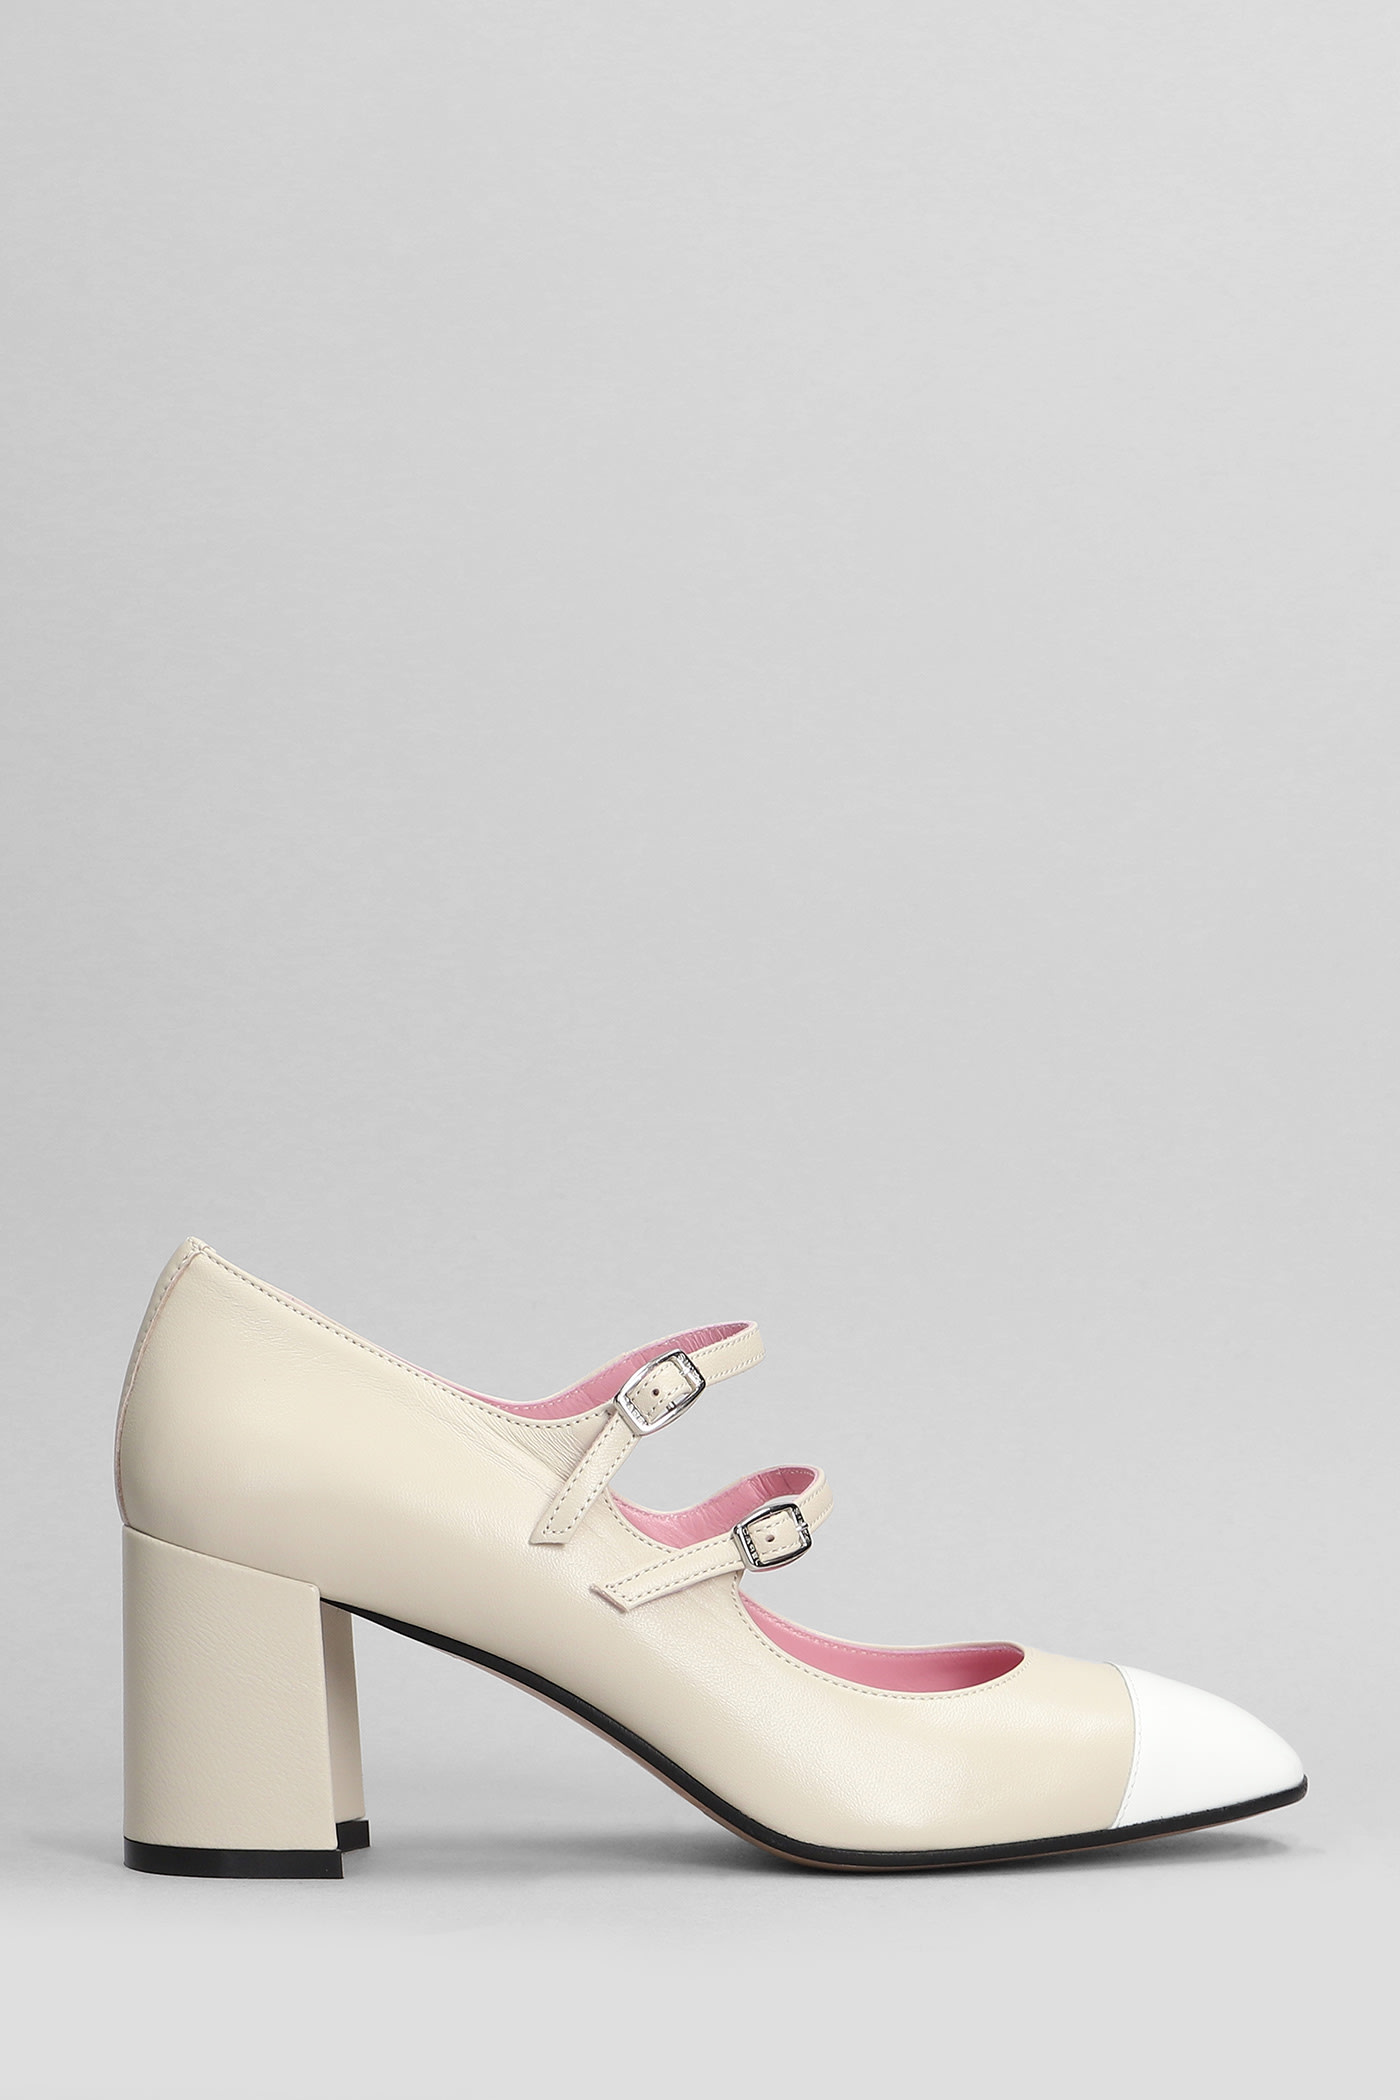 Cherry Pumps In Beige Leather